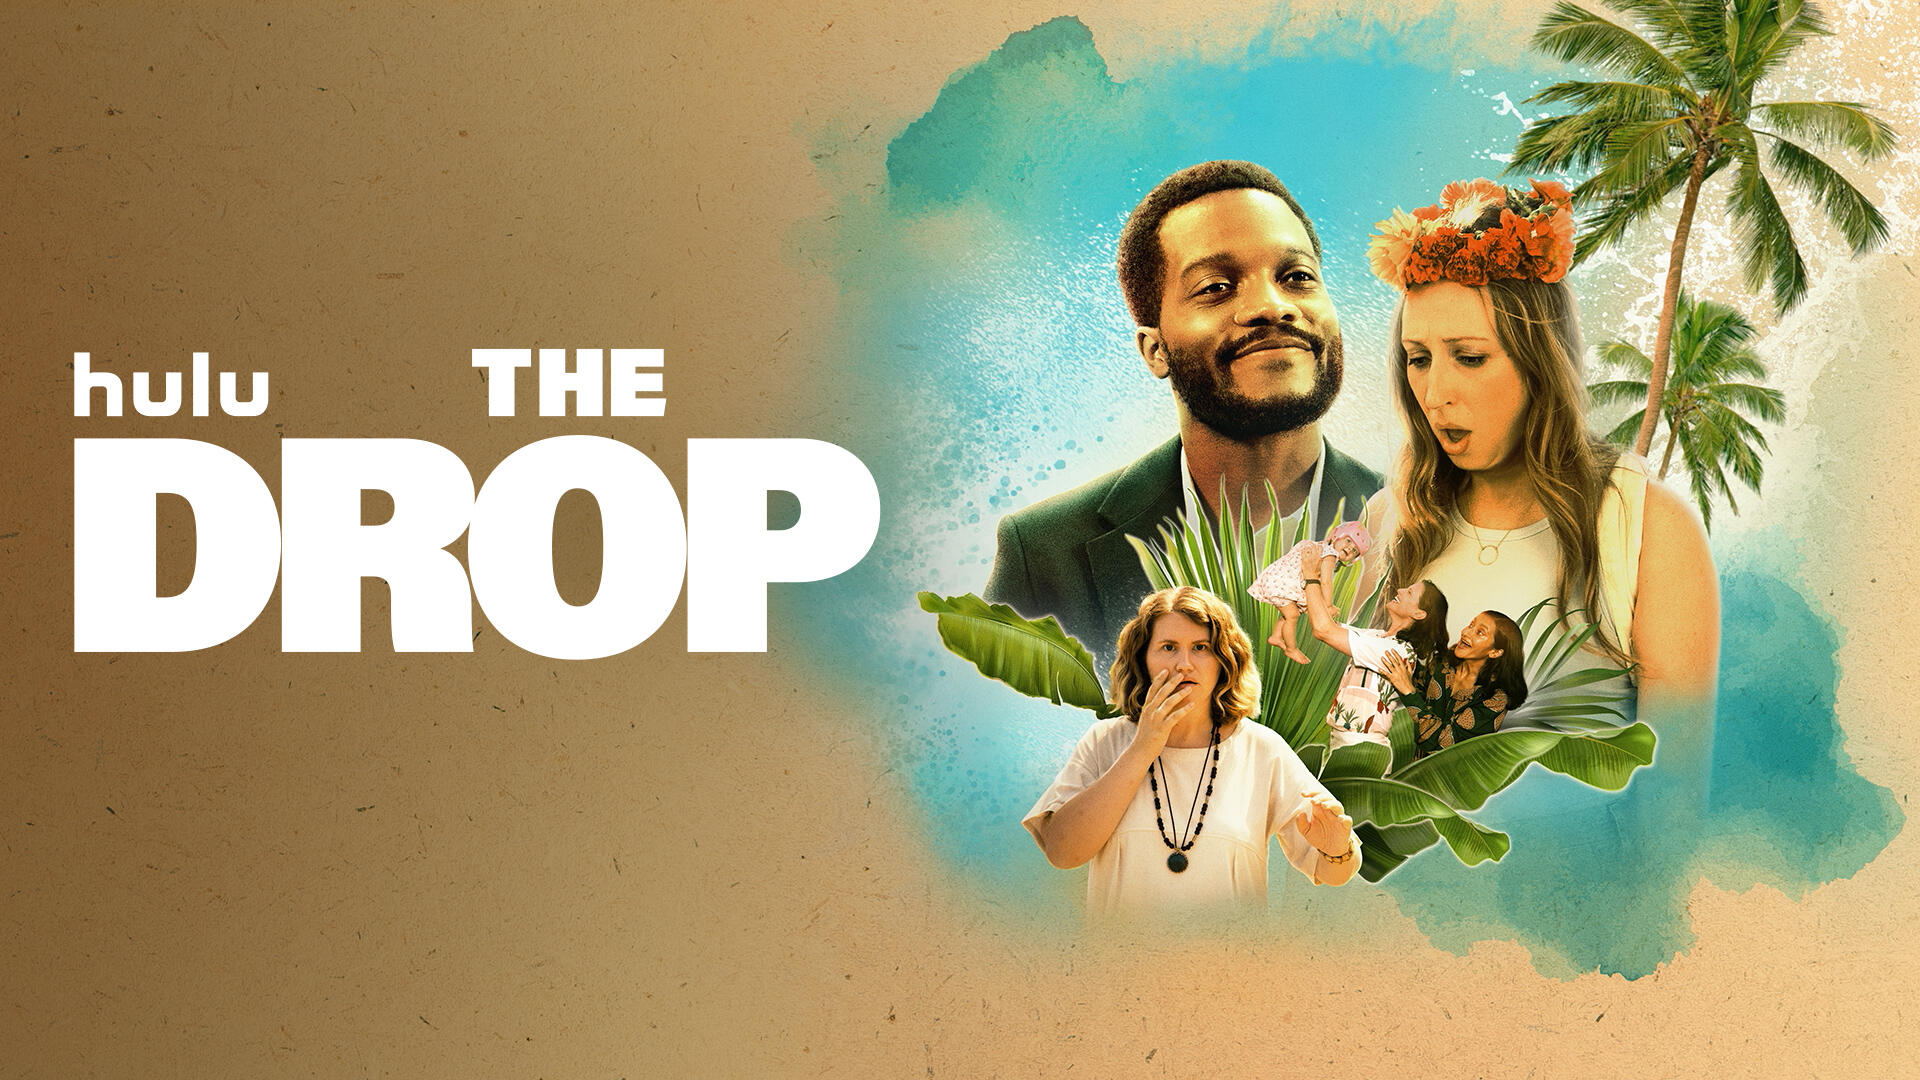 The Drop -- Lex (“PEN15’s” Anna Konkle) and Mani (“Coming 2 America’s” Jermaine Fowler) are a happily married young couple, running their dream artisanal bakery in Los Angeles and excited about starting a family together. A trip to a tropical island resort for a friend’s destination wedding, coinciding with Lex’s ovulation cycle, feels like the perfect opportunity to conceive. But good vibes and high hopes are cut short when, shortly after their arrival to paradise, Lex accidentally drops her friend’s (Aparna Nancherla, “Search Party”) baby in front of all their friends. Paradise becomes purgatory for our couple as recriminations, passive-aggression and old wounds begin to permeate the island reunion and throw Mani and Lex’s future into deep uncertainty. (Courtesy of Hulu)